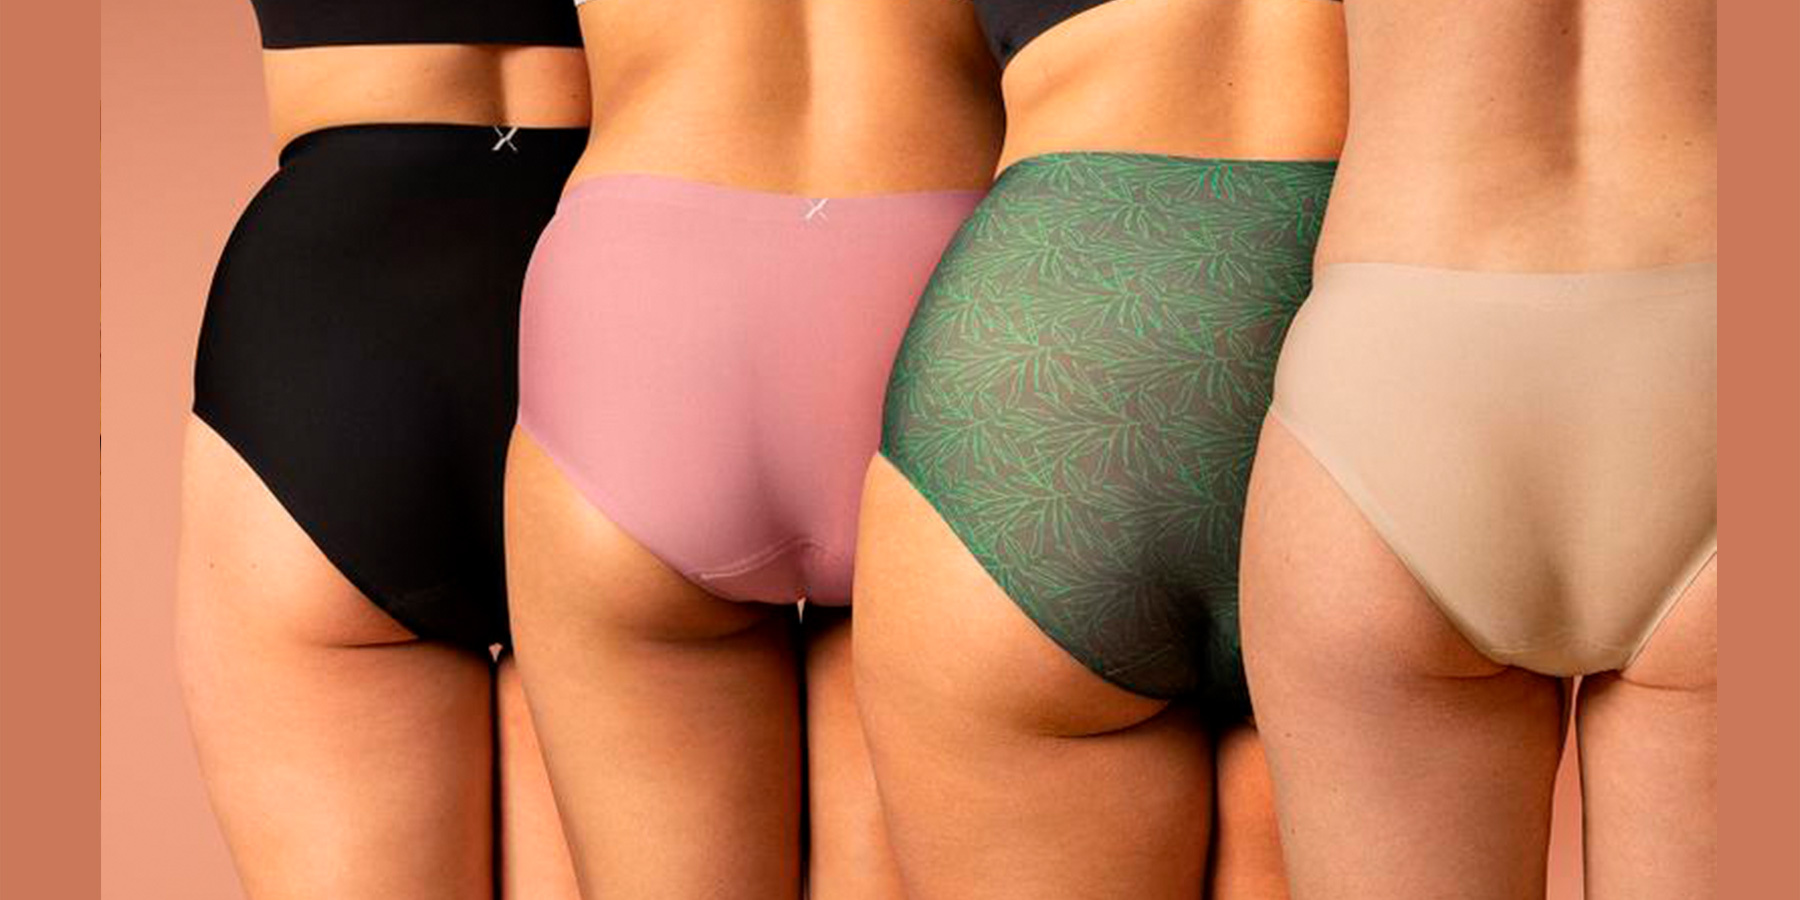 The Best Period Underwear for That Time of the Month - Best Period